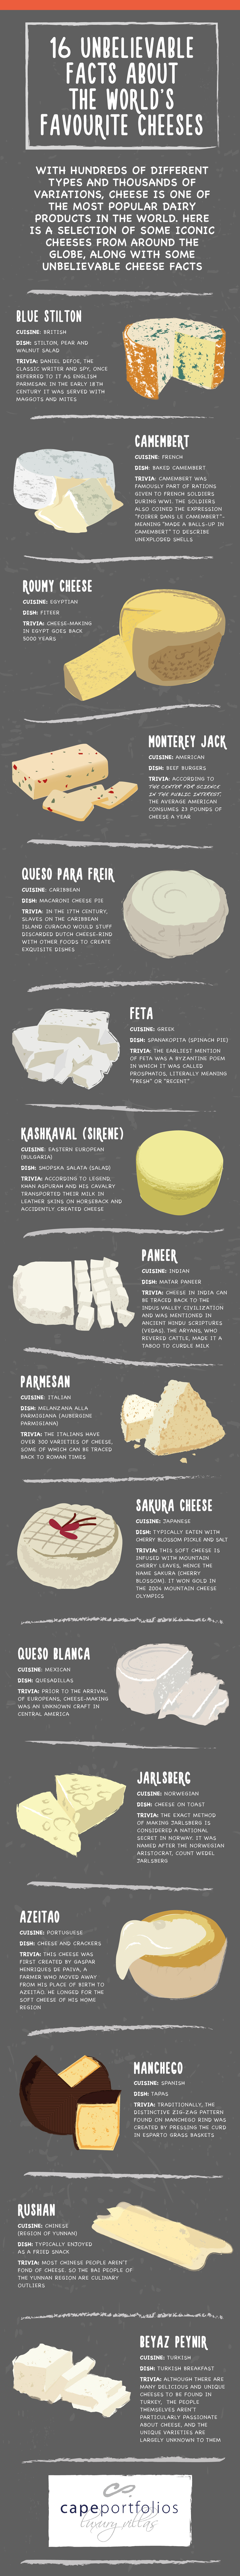 16 Unbelievable Facts About the World’s Favorite Cheeses